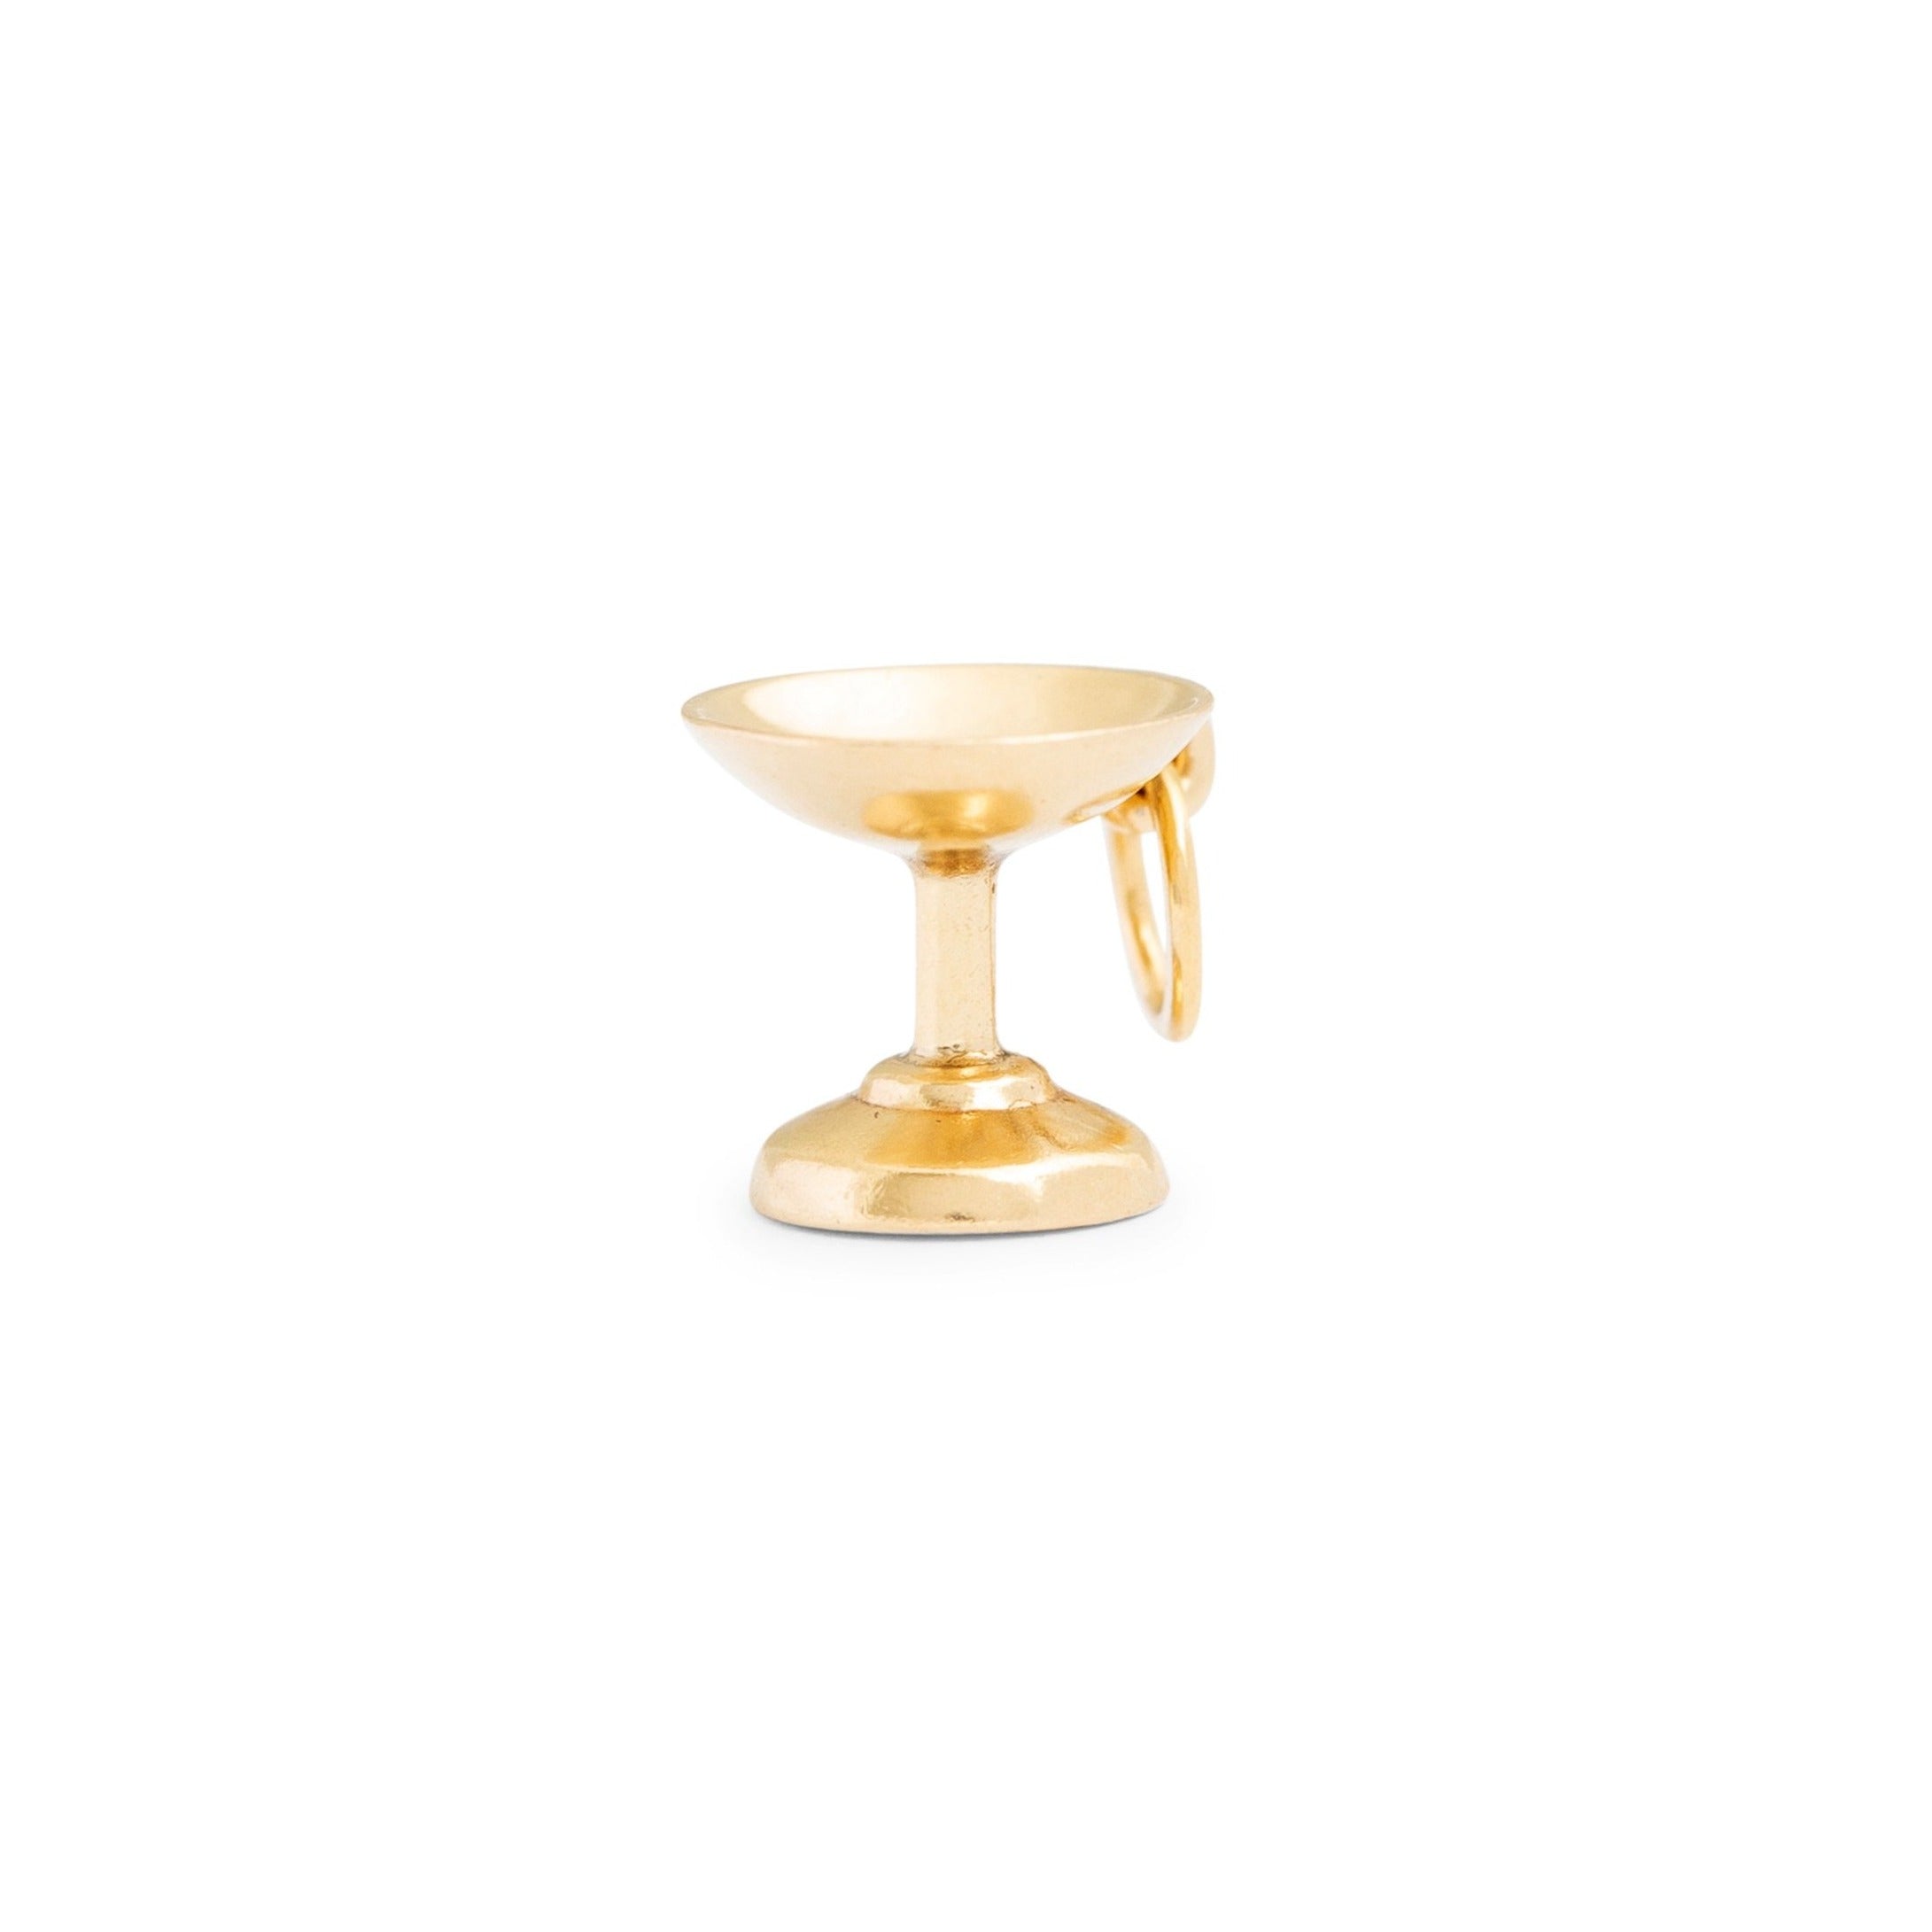 Champagne Coupe 14k Gold Charm